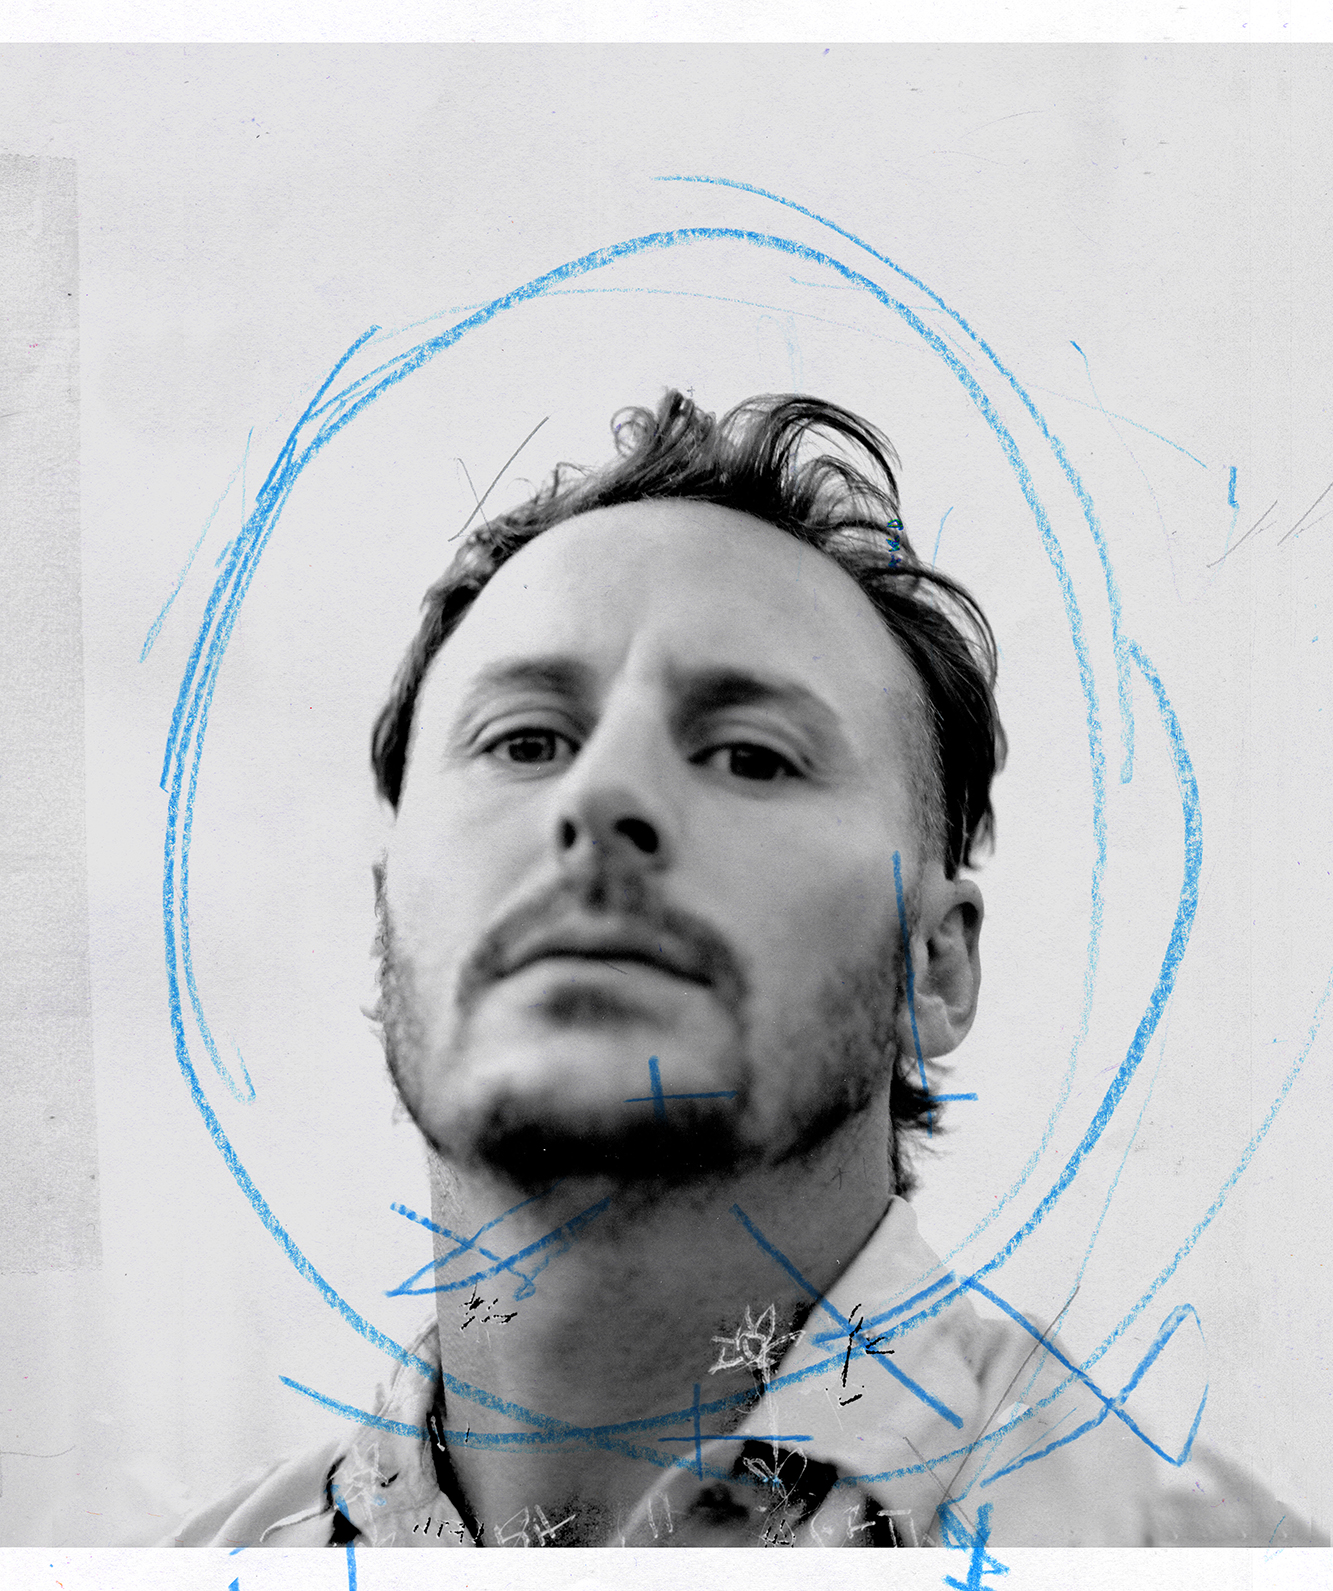 BEN HOWARD announces global transmission from Goonhilly Satellite Earth Station on 8th April 1